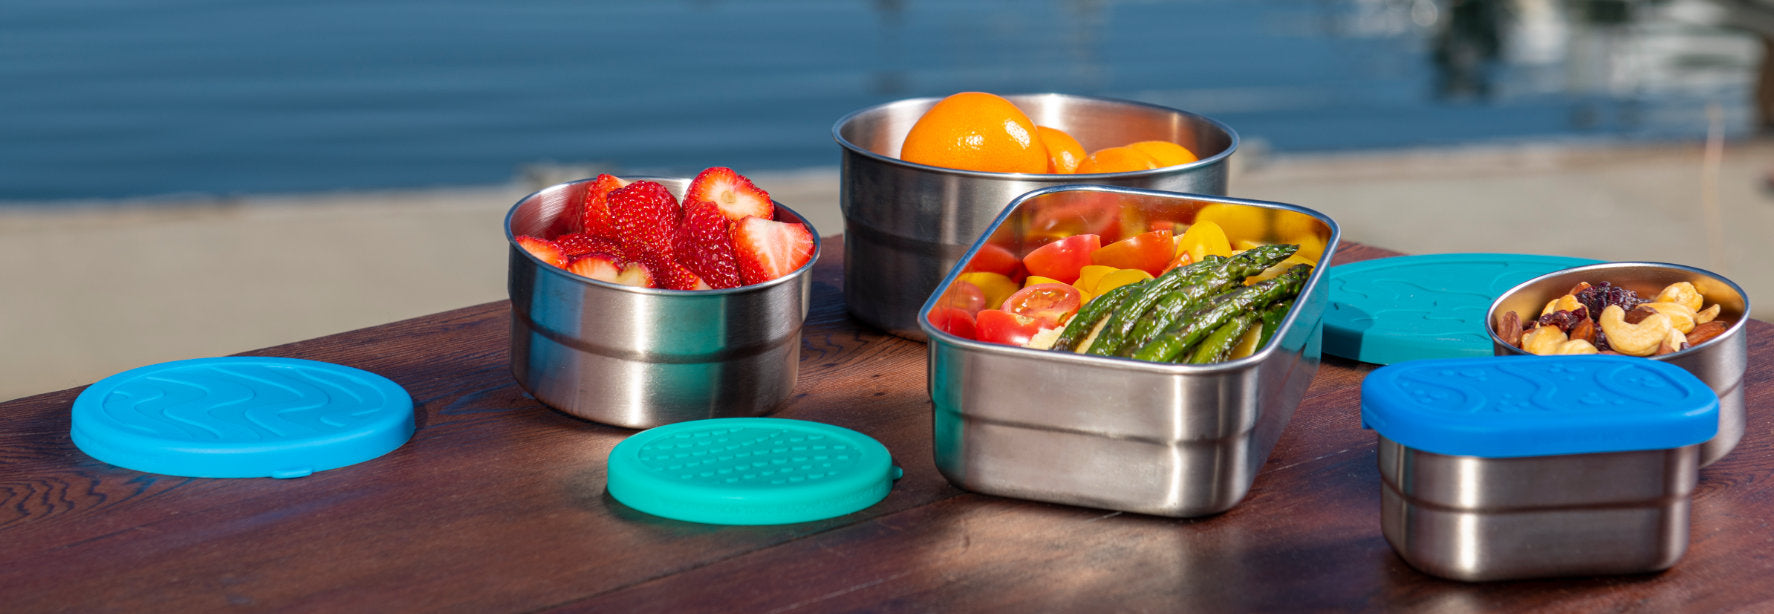 ECOlunchbox stainless steel lunchbox containers on outdoor table at a pier